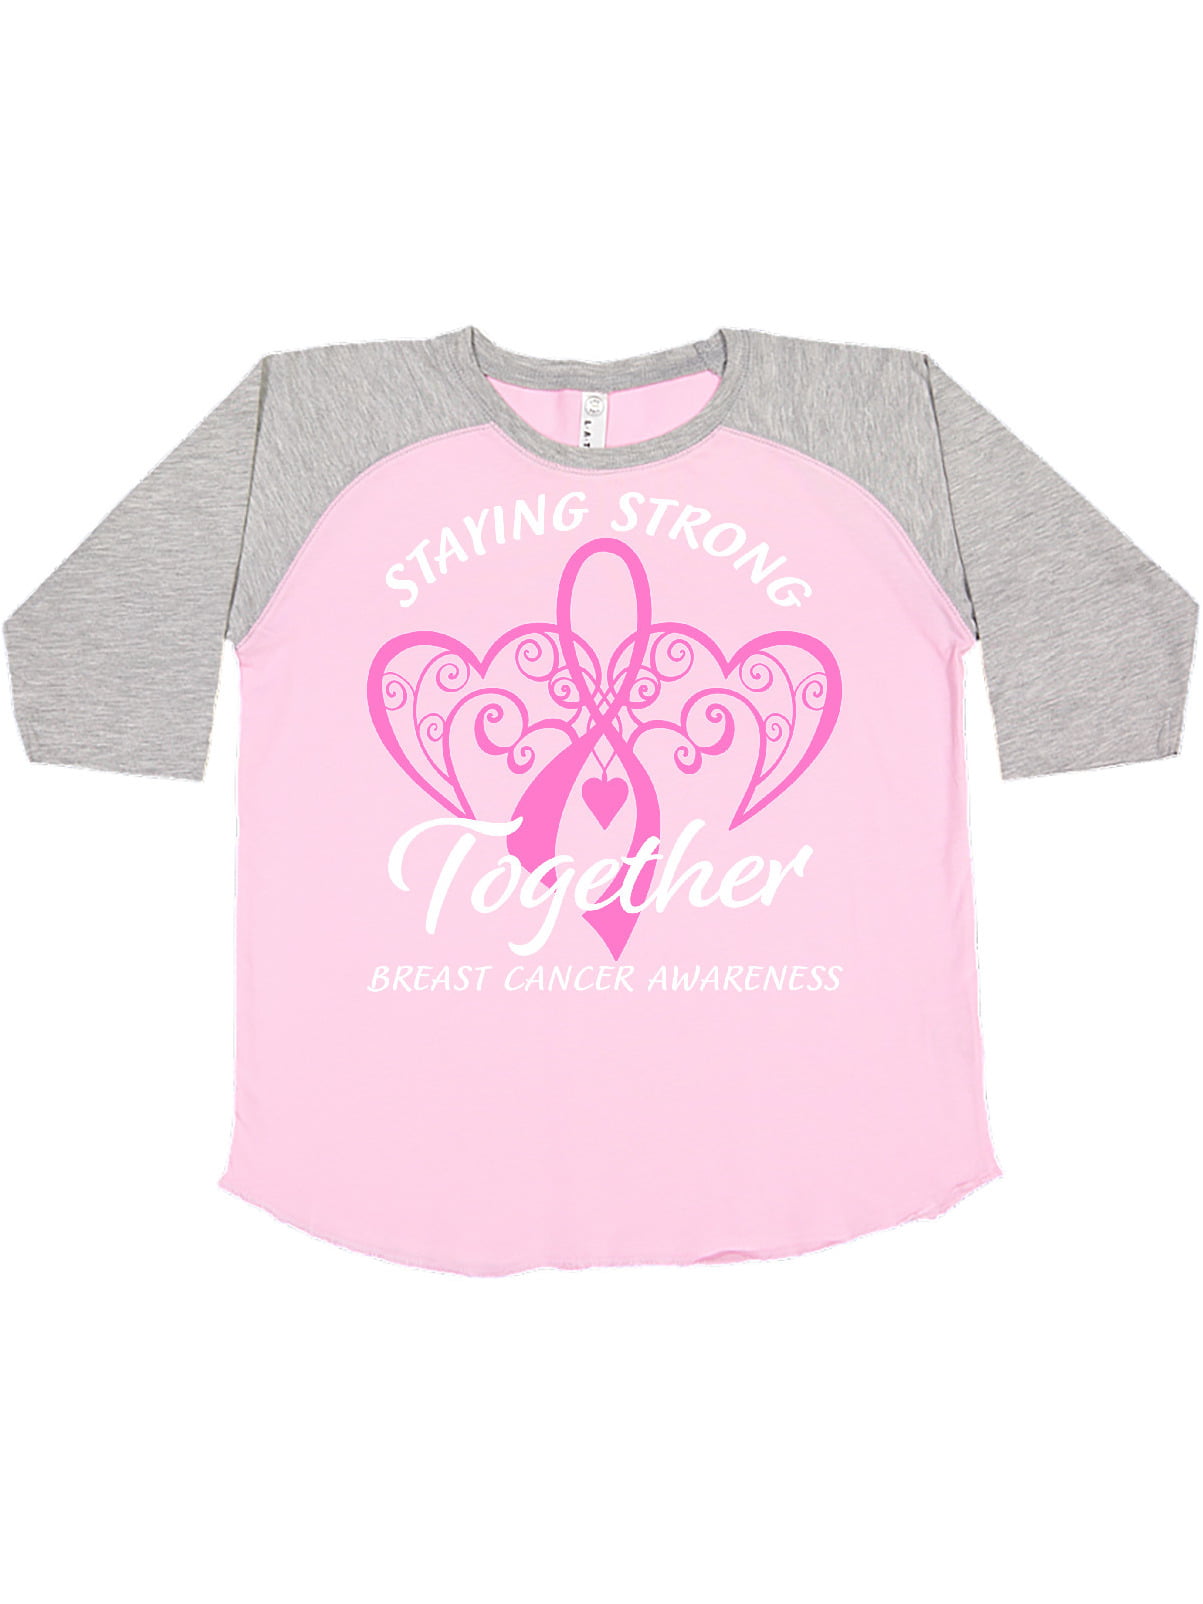 Breast Cancer T-Shirt Stronger Together Ribbon T Shirts for Men A 